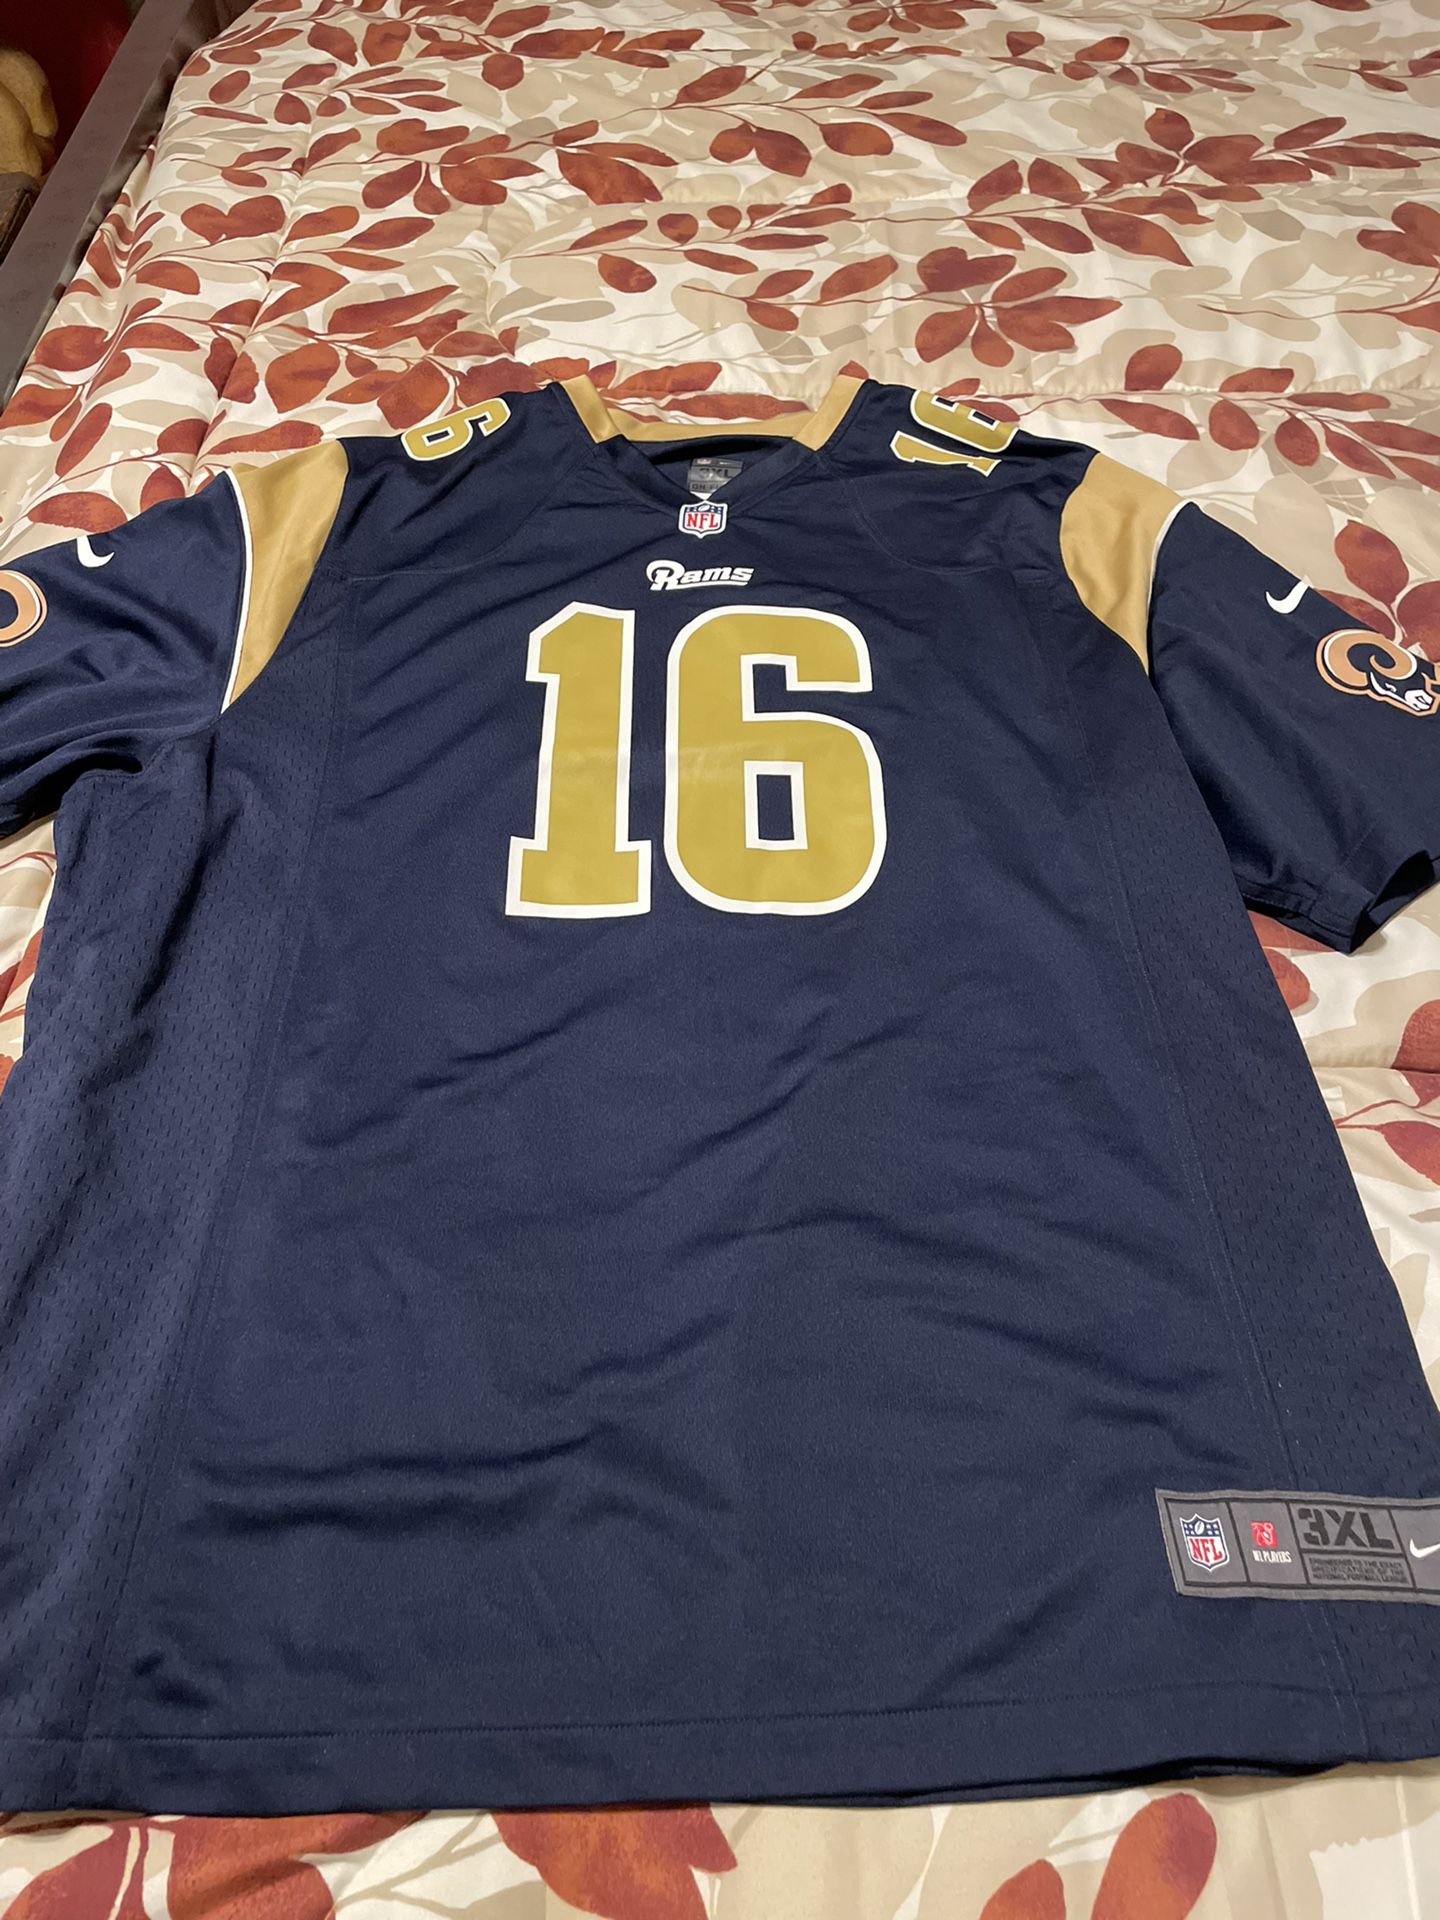 Men's Jared Goff Los Angeles Rams Jersey for Sale in Corona, CA - OfferUp